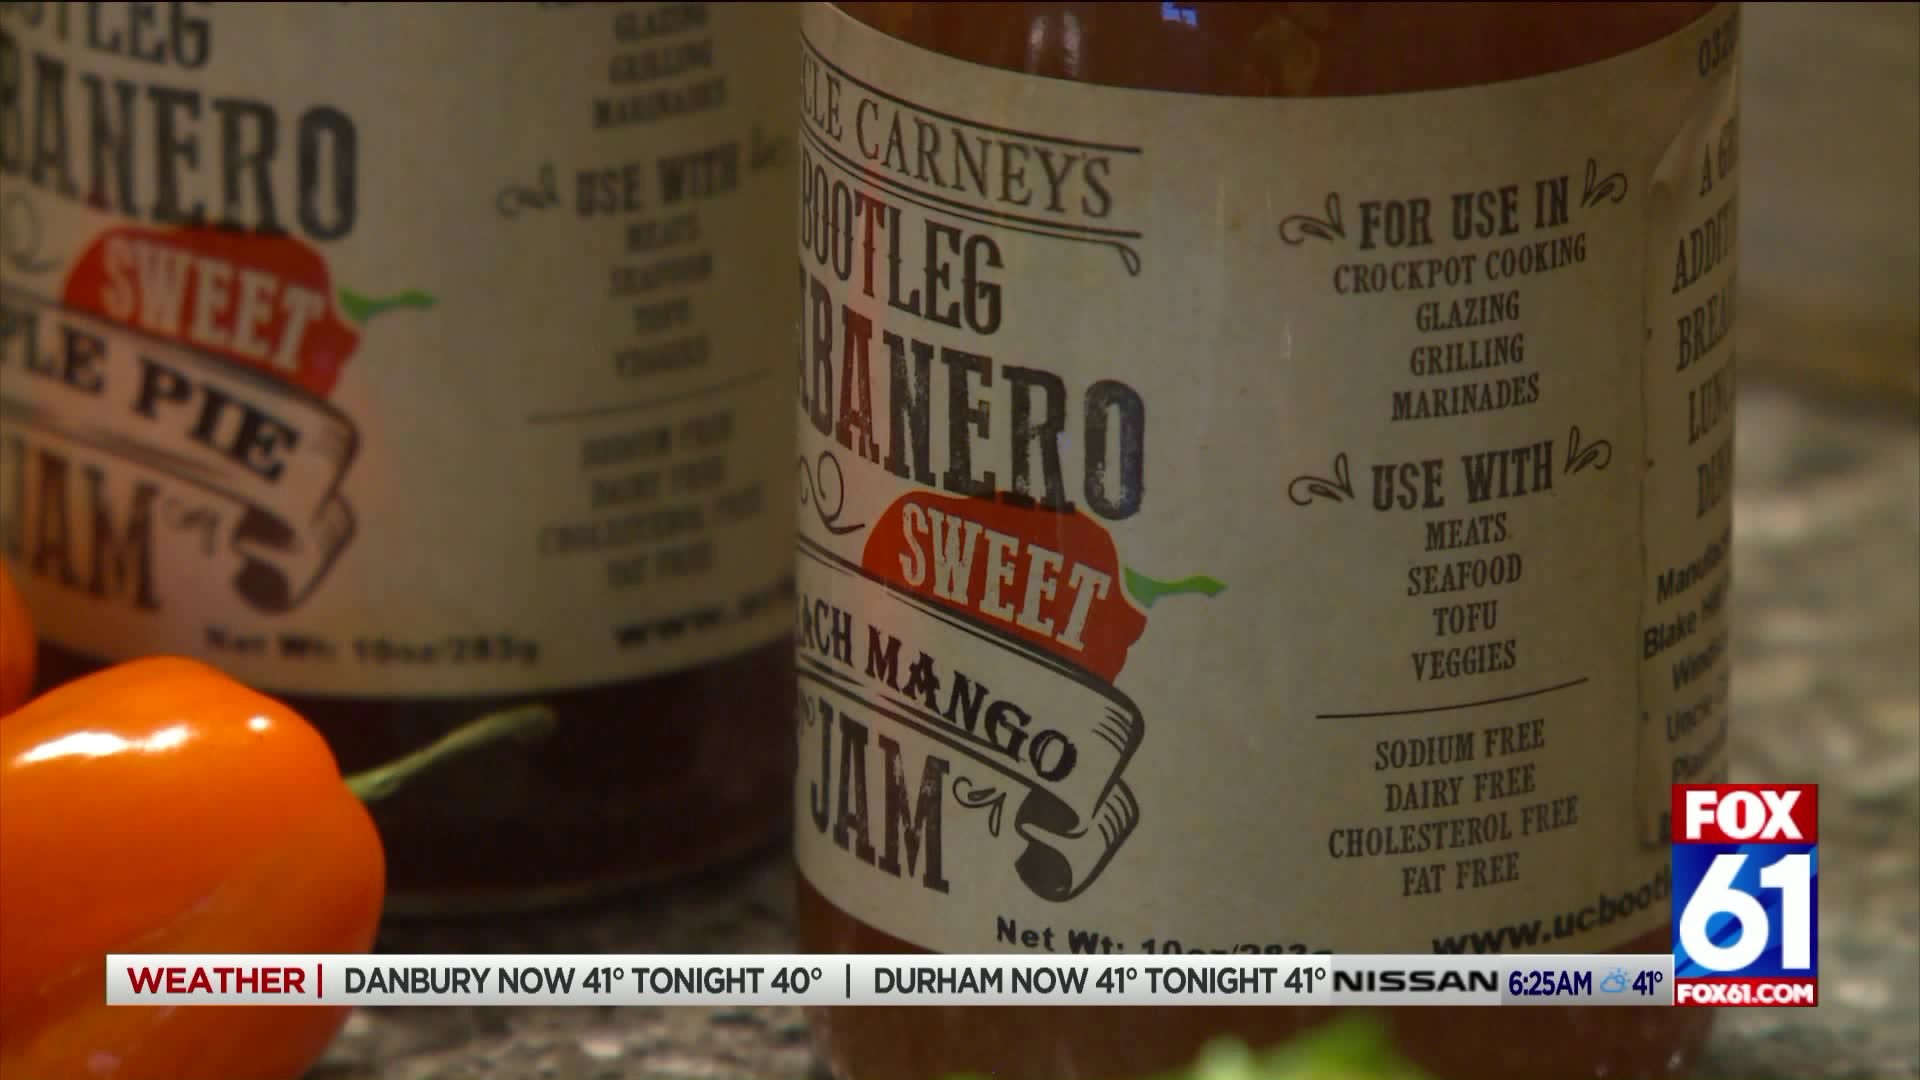 WorkinCT #CTConfident: Uncle Carney’s Bootleg Habanero leaving a lasting legacy for a Plainville family